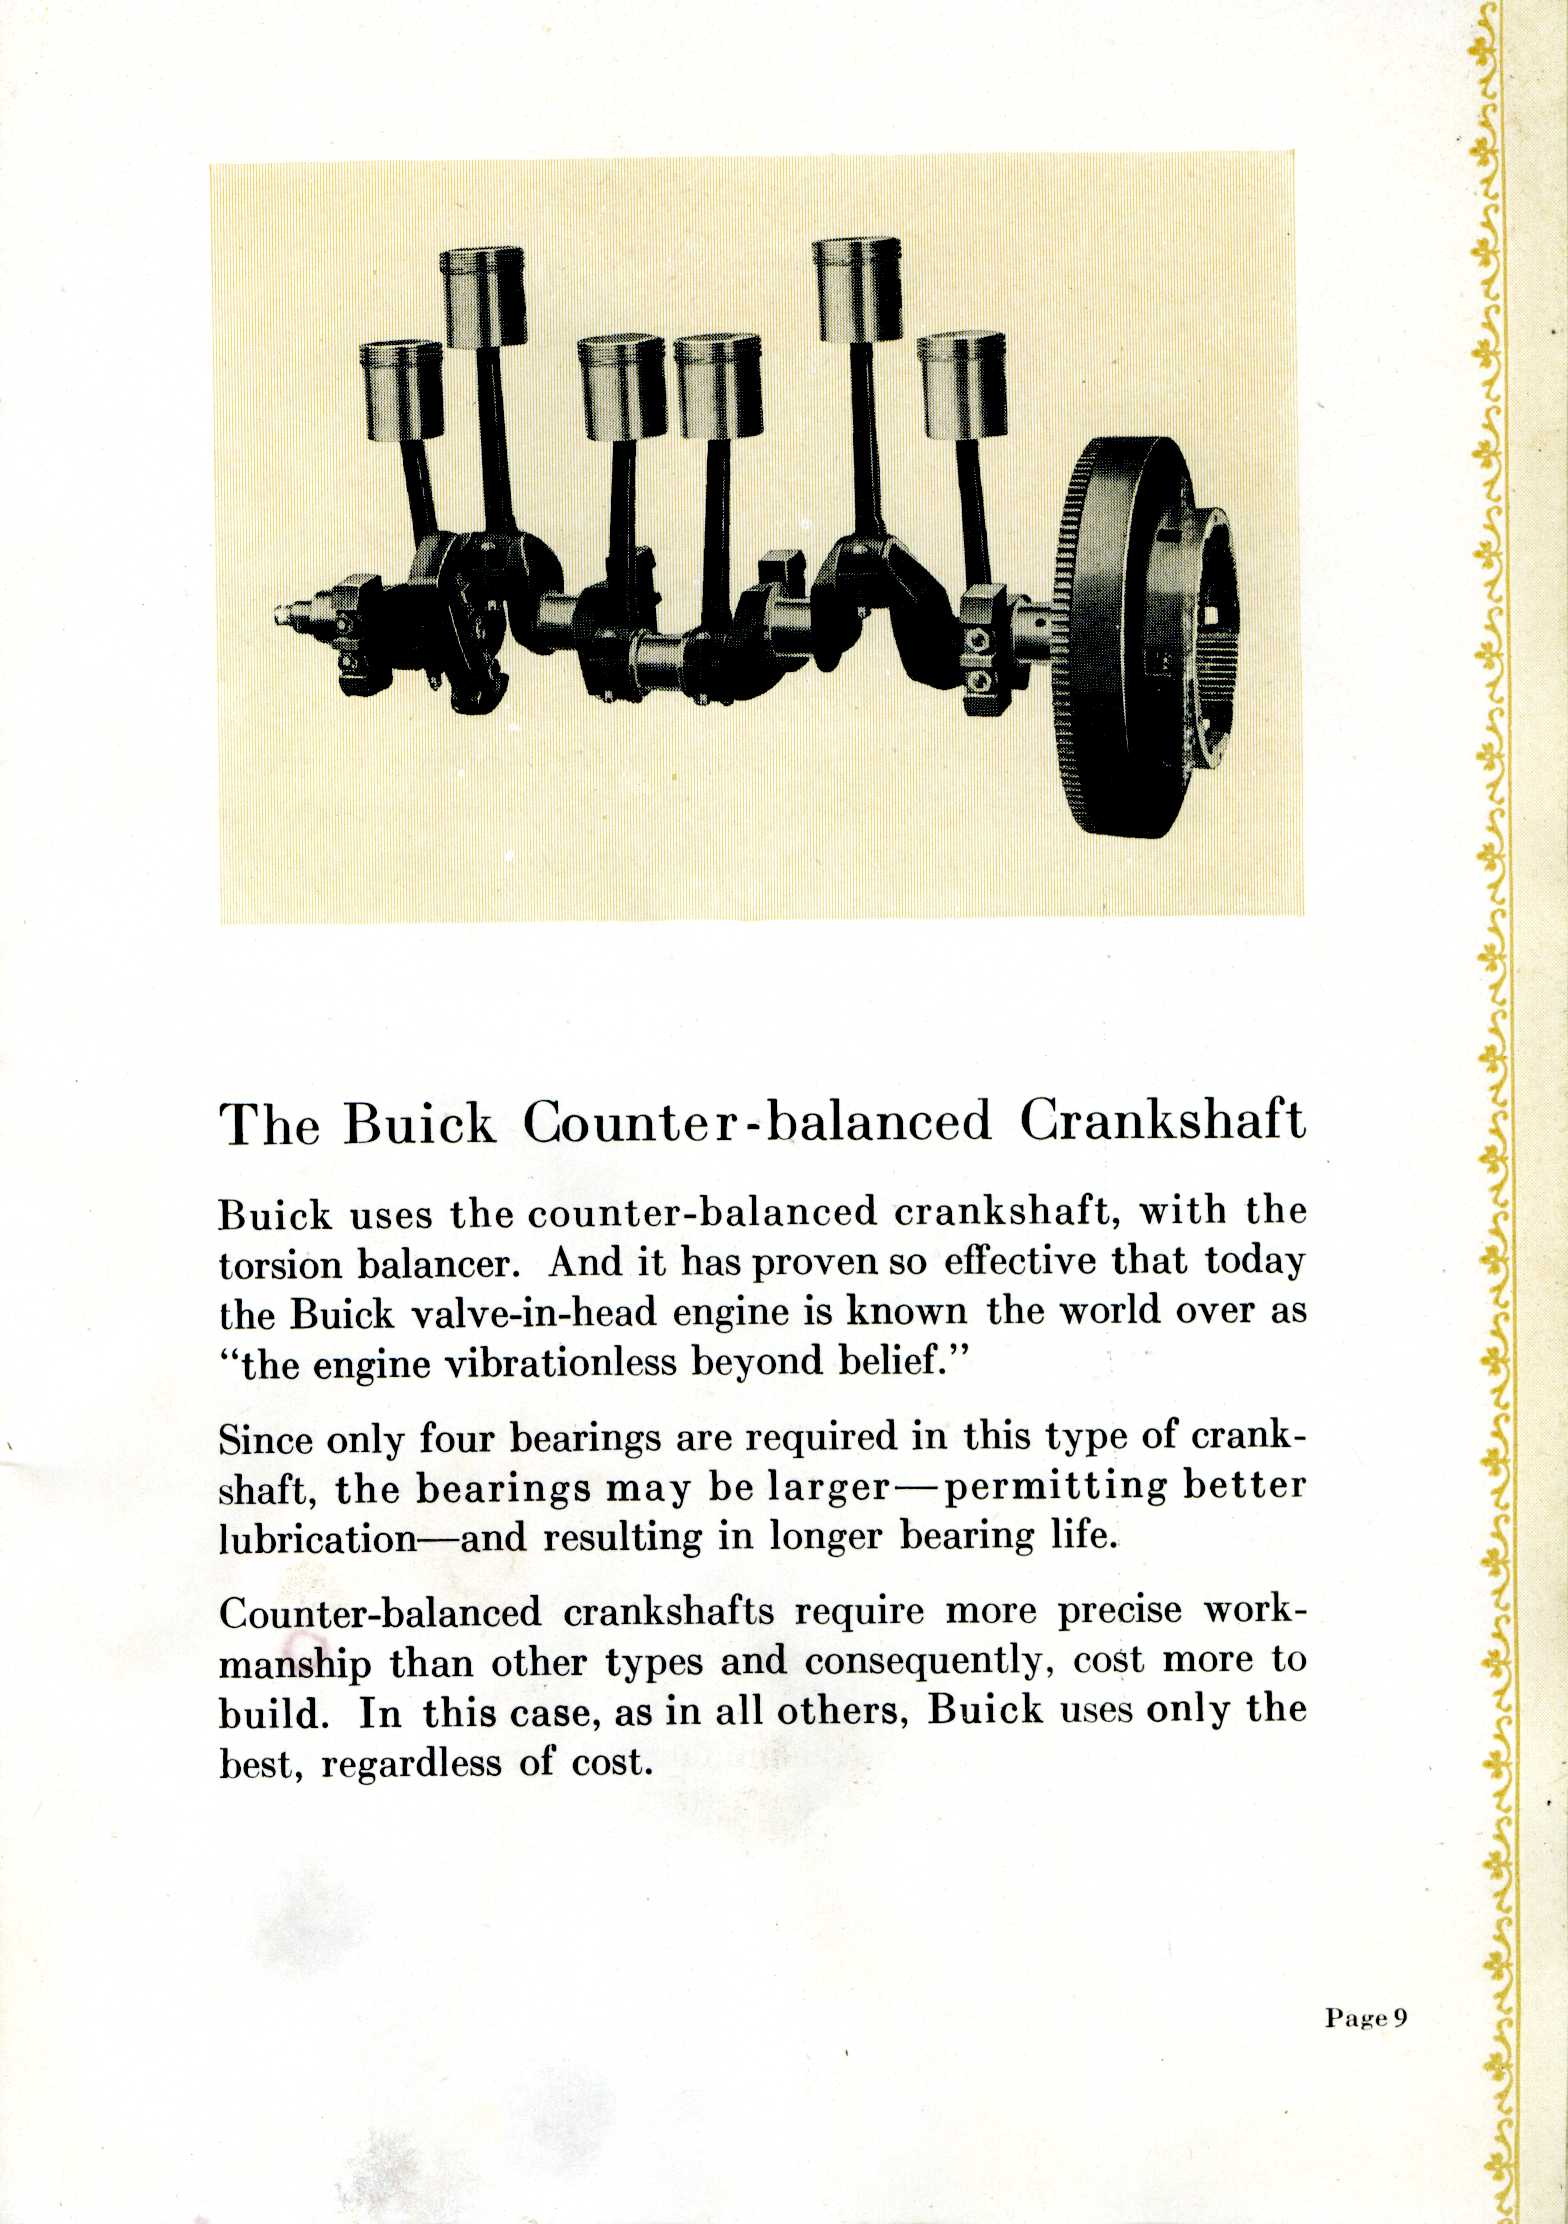 1928 Buick-How to Choose a Motor Car Wisely-09